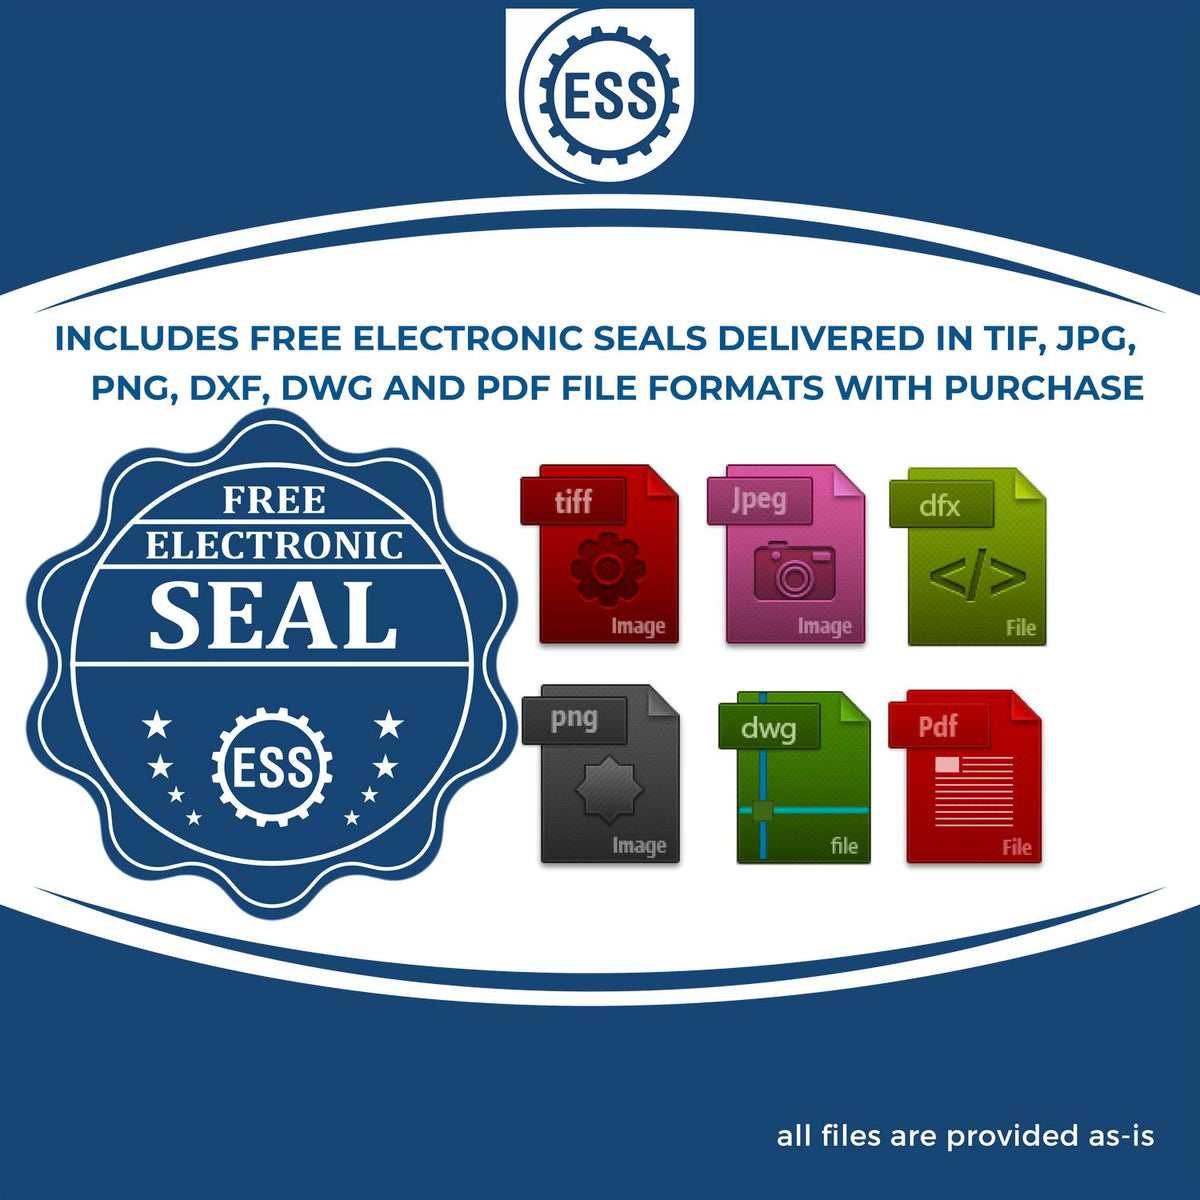 An infographic for the free electronic seal for the Self-Inking State Seal Kentucky Notary Stamp illustrating the different file type icons such as DXF, DWG, TIF, JPG and PNG.